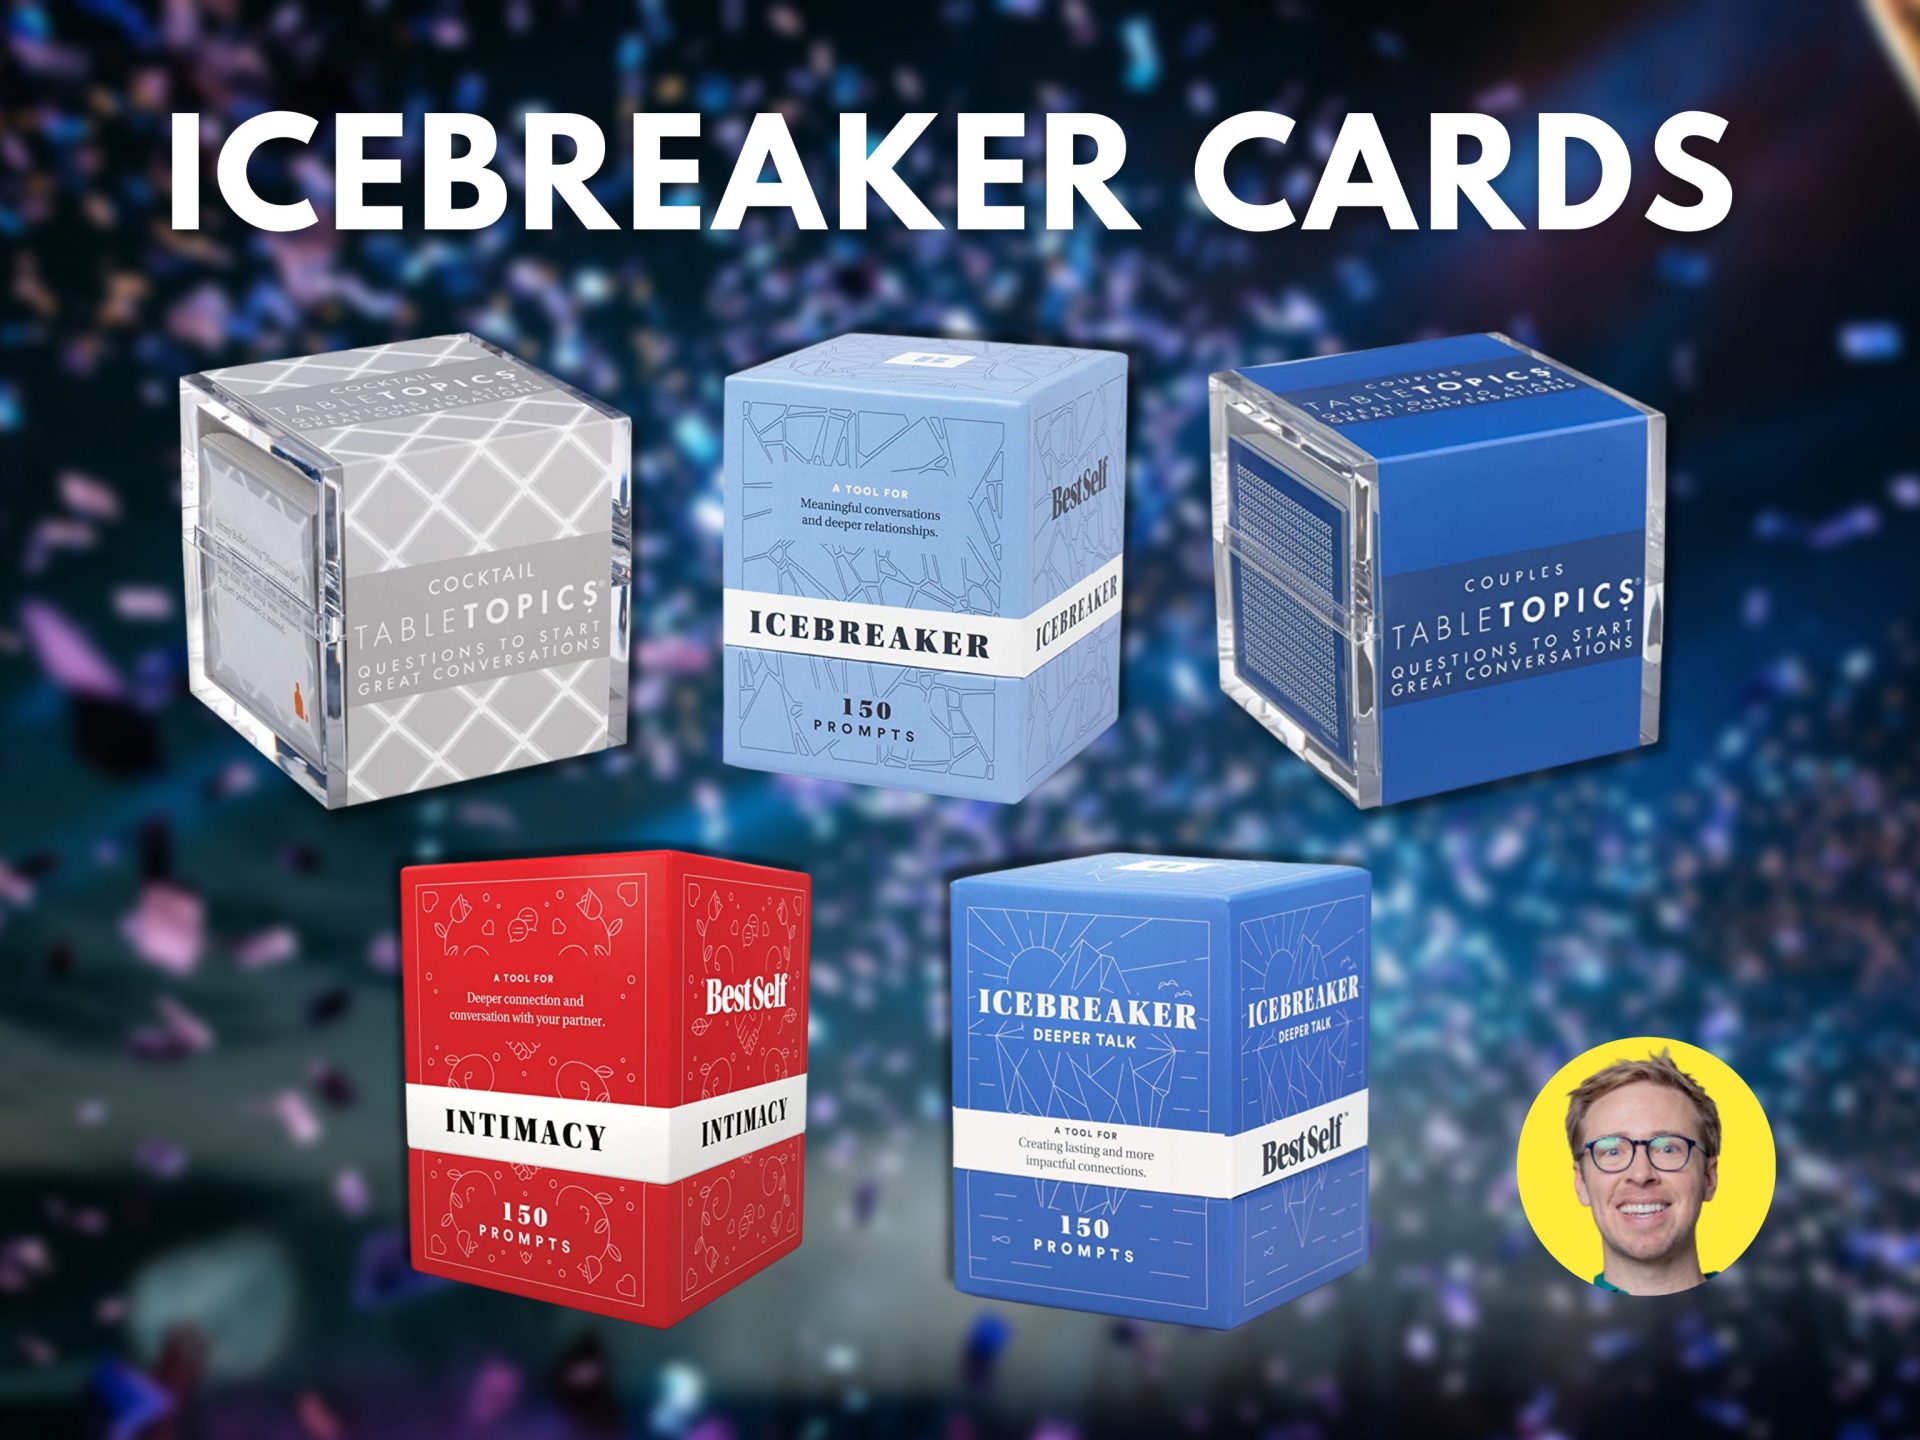 https://party.pro/wp-content/uploads/2022/05/Icebreaker-cards-featured-image.jpg